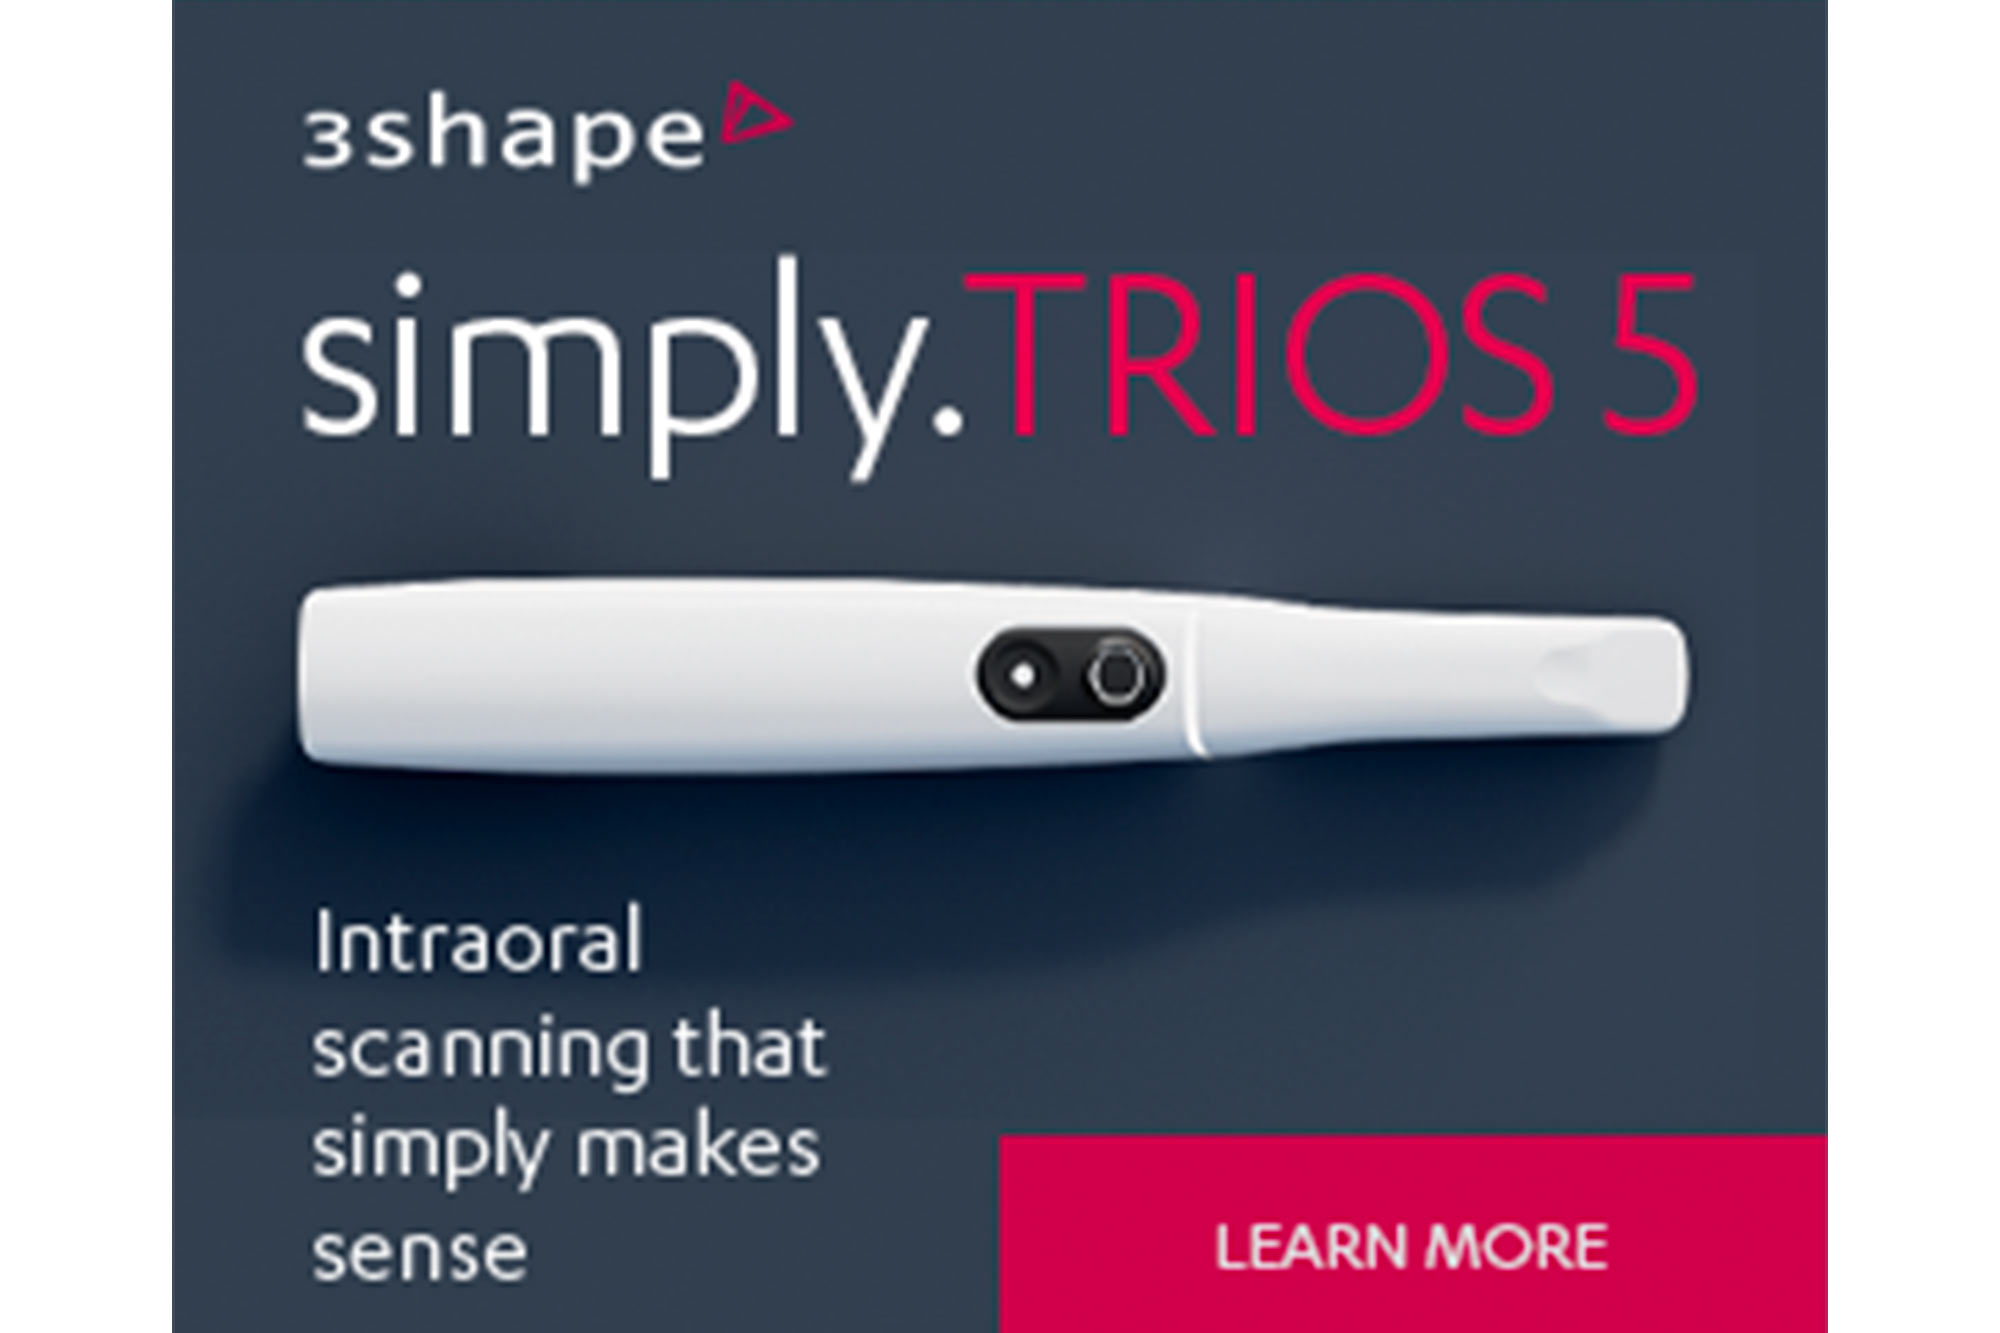 3shape launches Trios 5 Wireless intraoral scanner - Dentistry